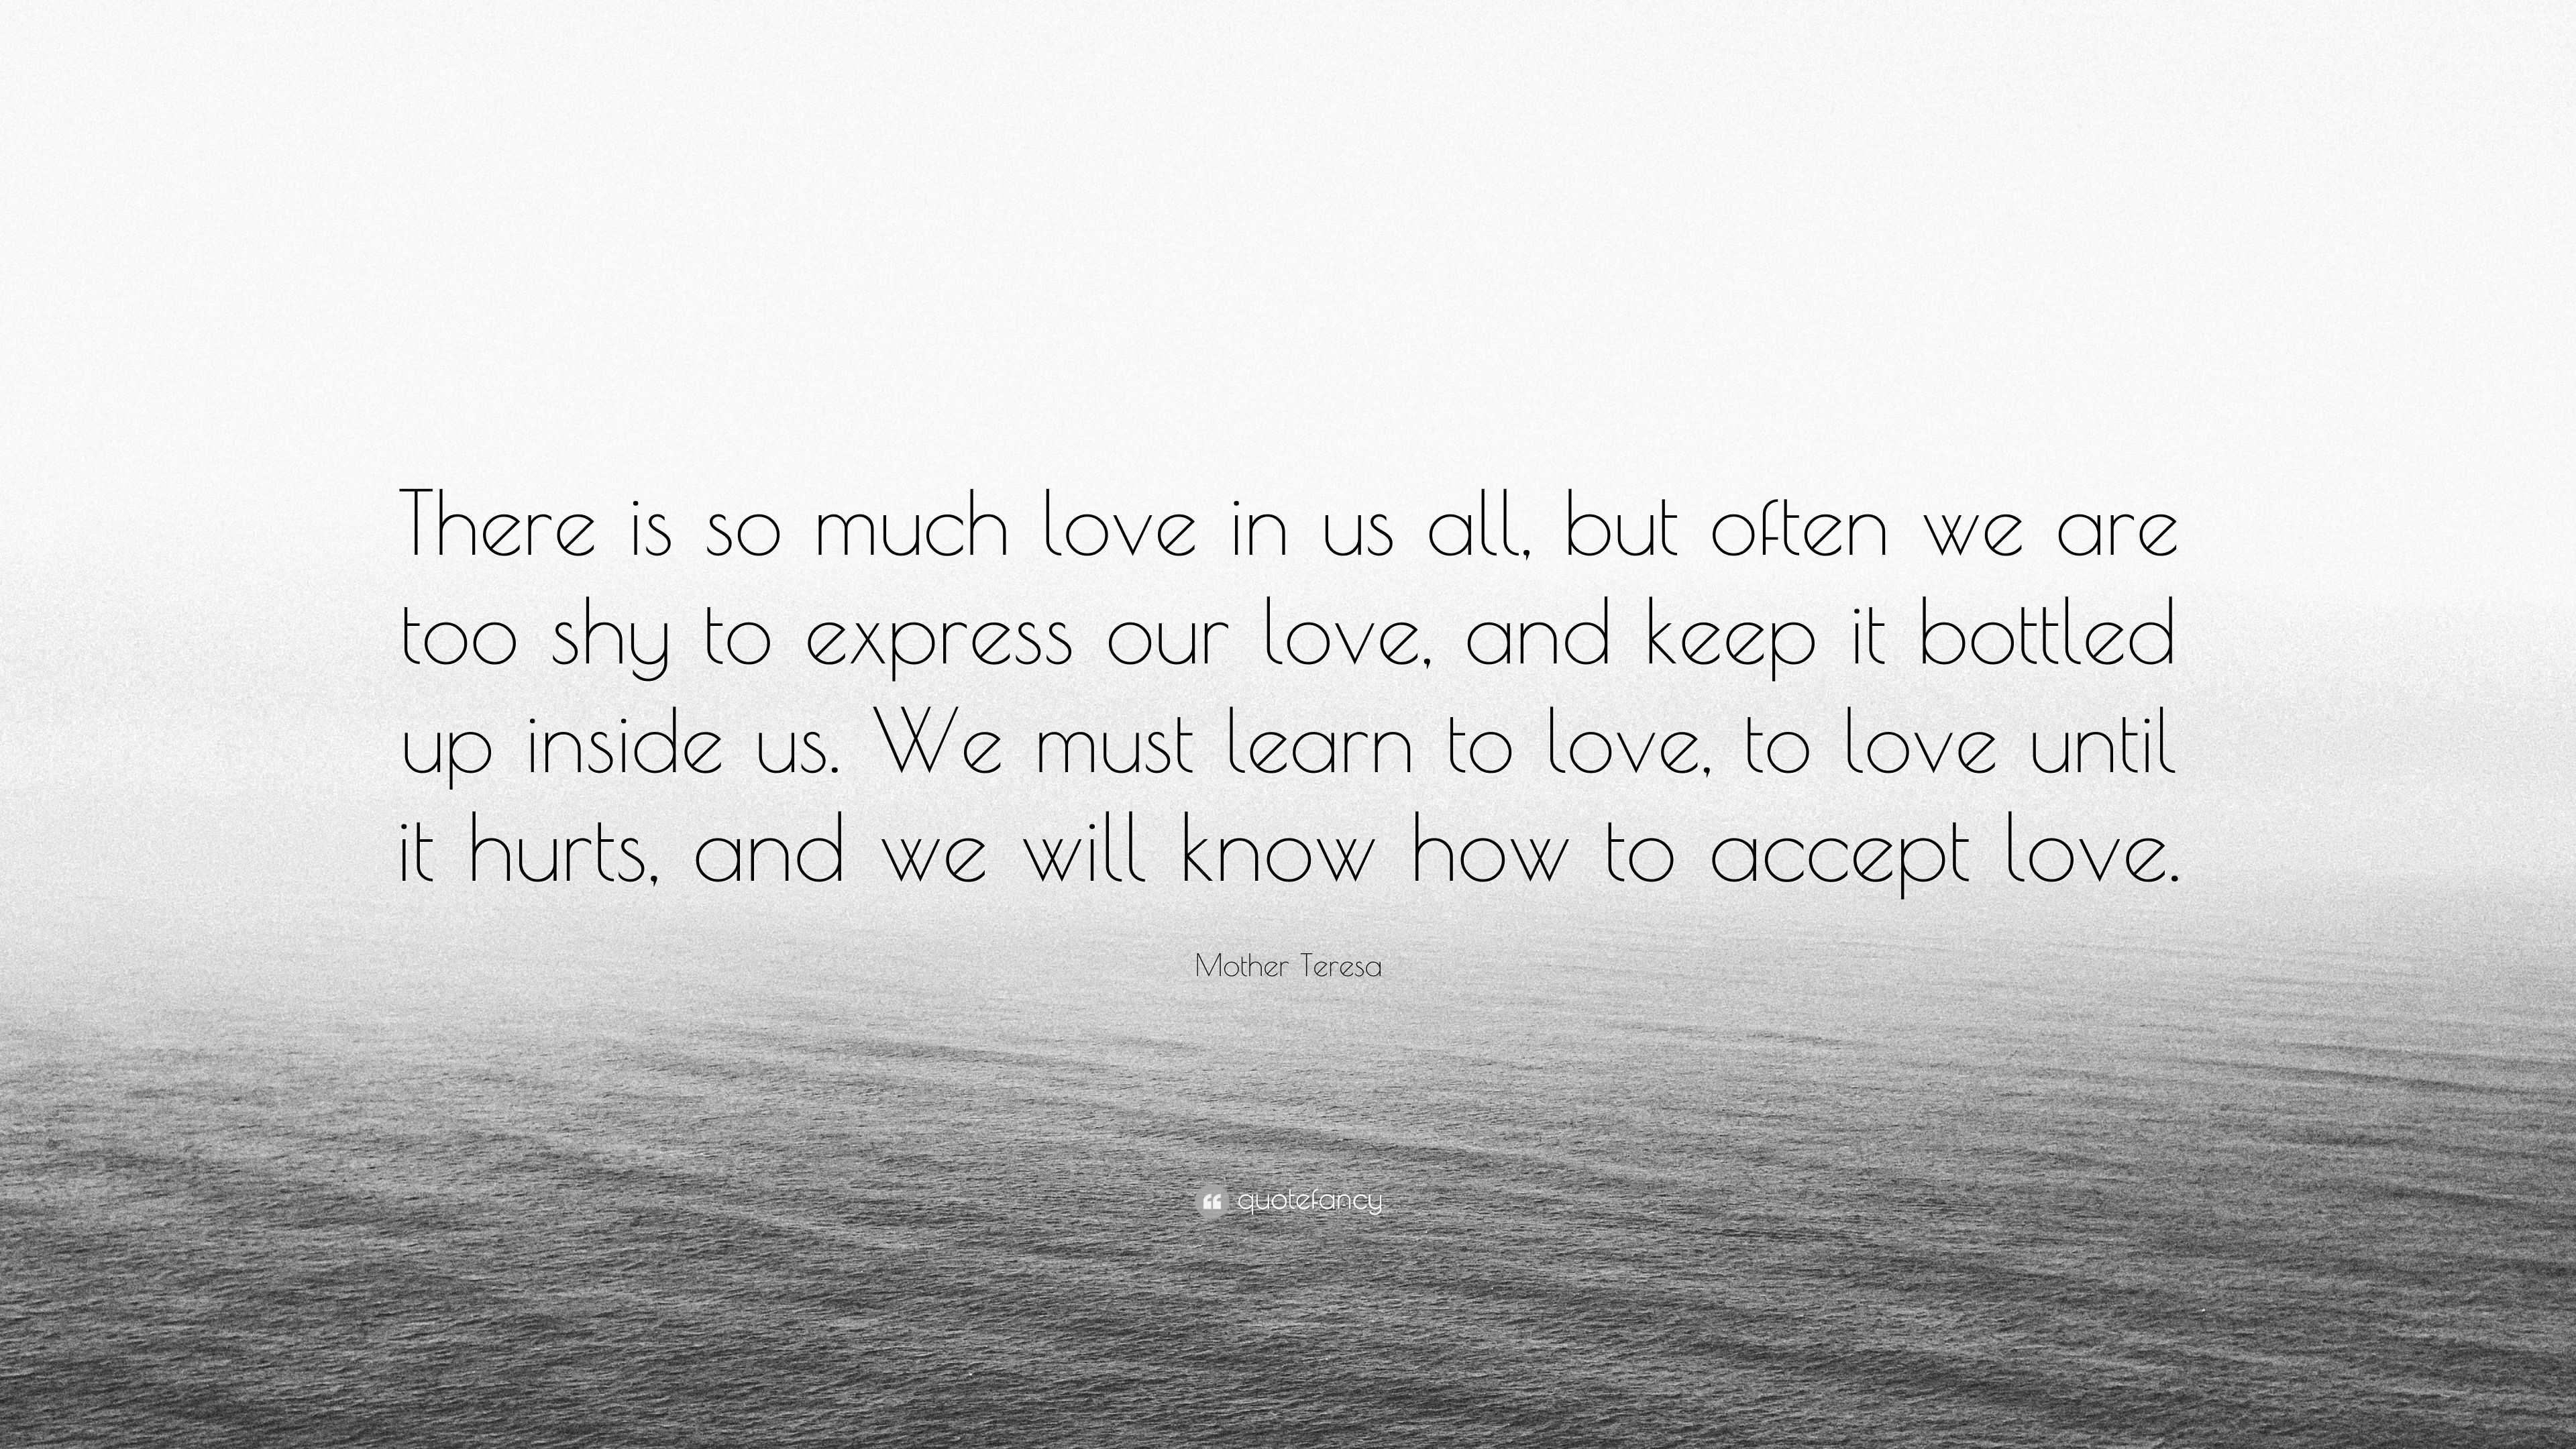 Mother Teresa Quote “There is so much love in us all but often